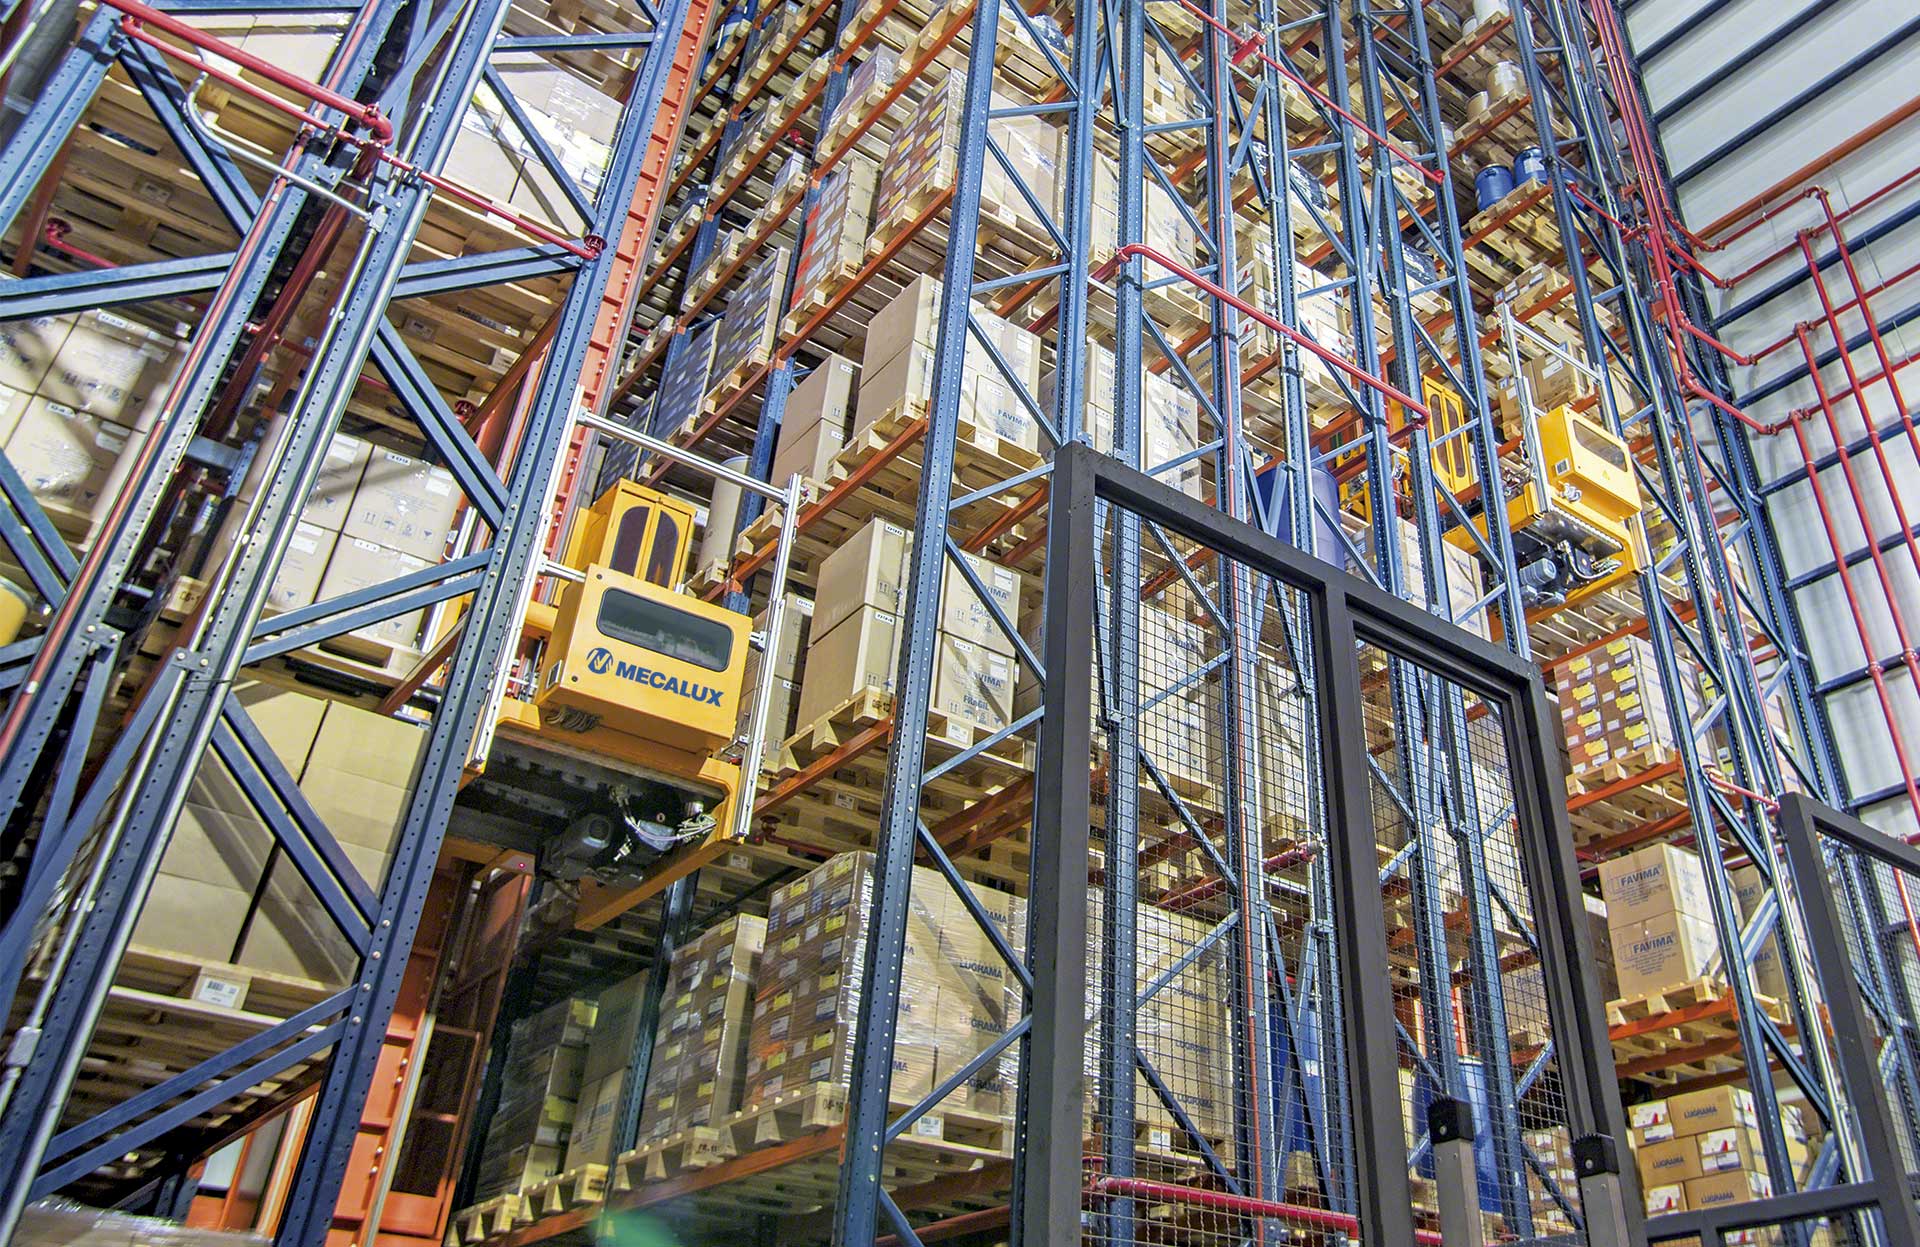 By leveraging available height and operating in narrow aisles, stacker cranes expand storage capacity